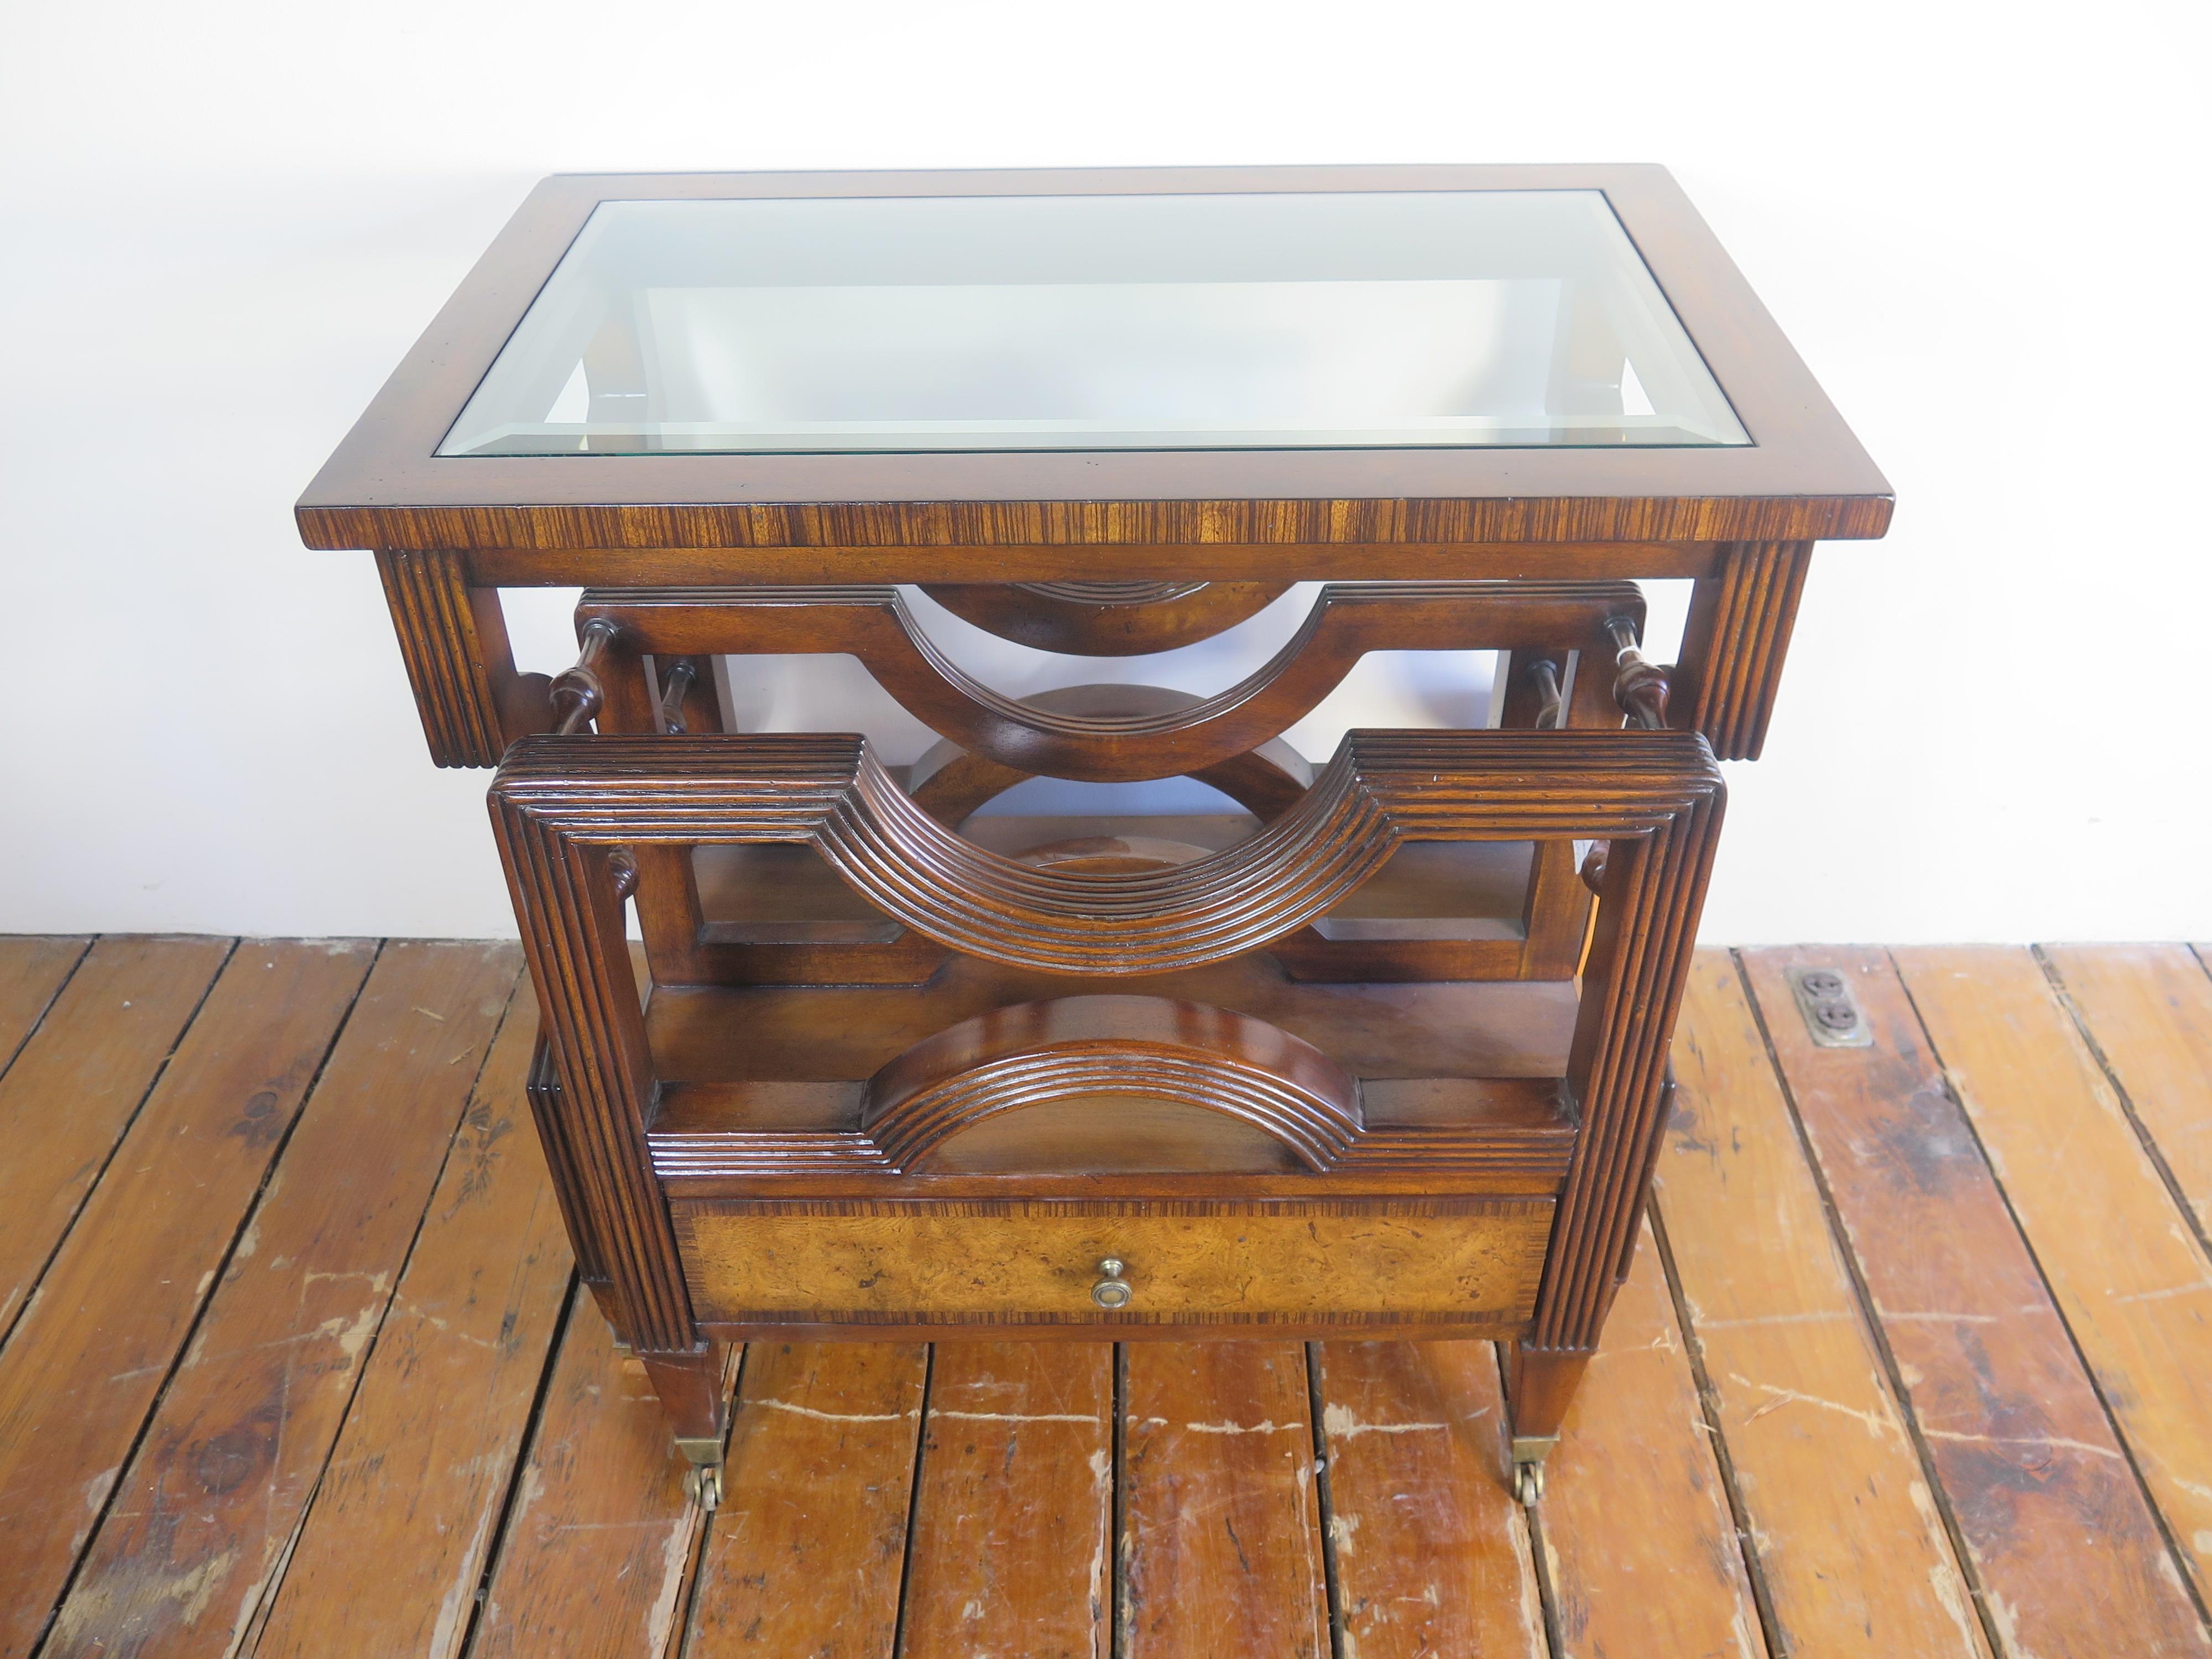 Nesting bookrack canterbury table with glass top inlay.